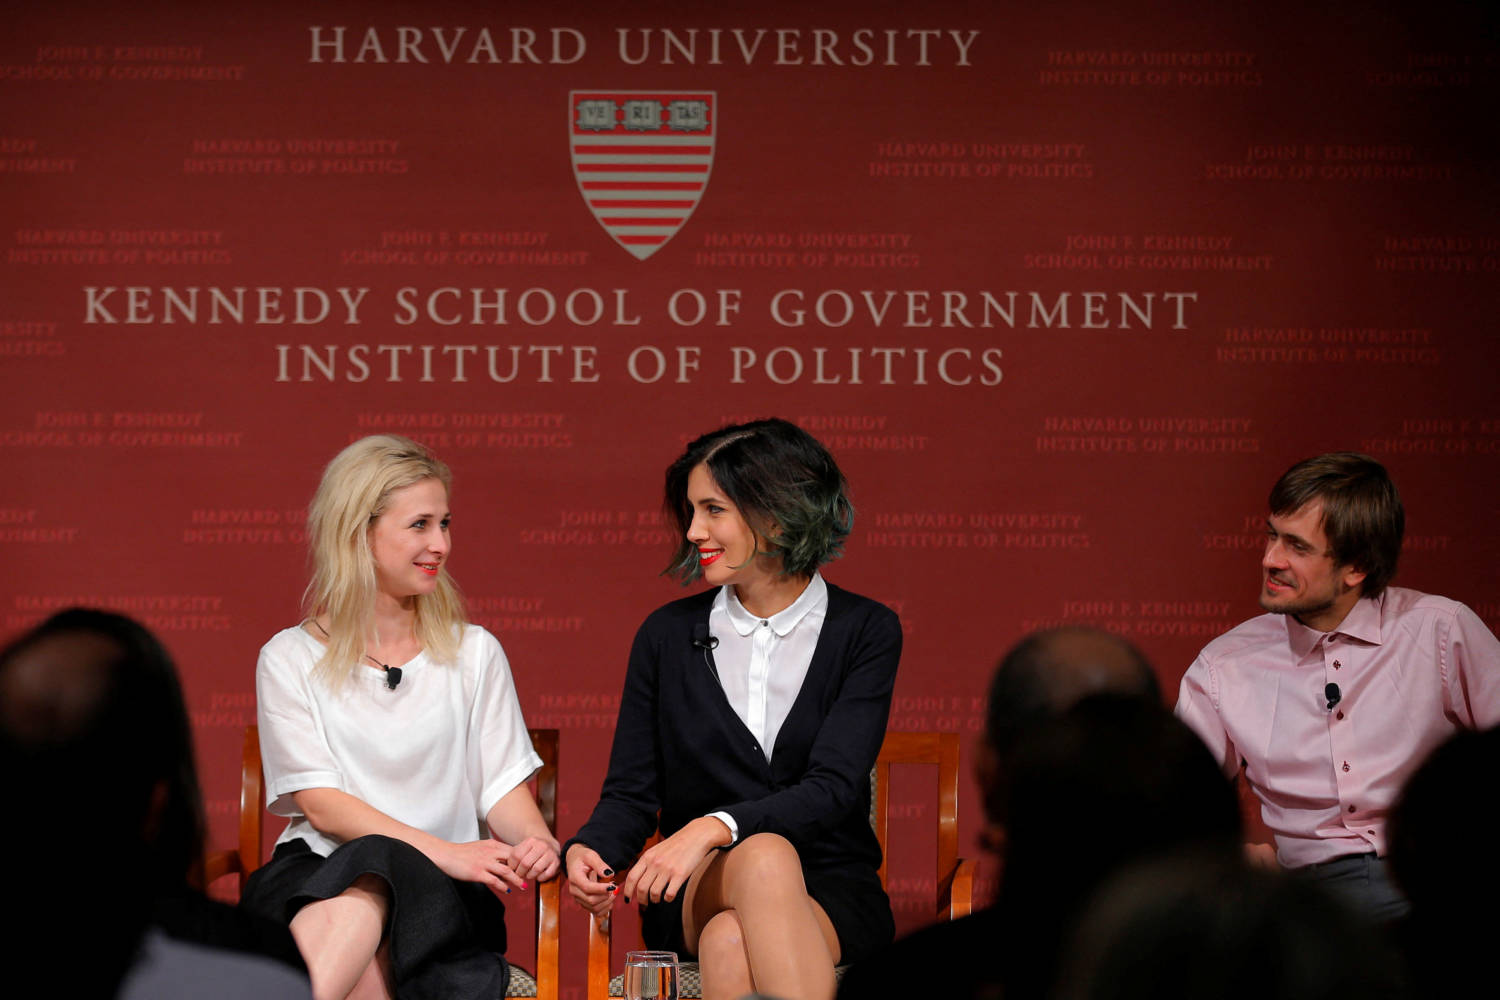 File Photo: Alyokhina And Tolokonnikova, Members Of The Punk Protest Band Pussy Riot, Attend A Forum At The Kennedy School Of Government At Harvard University In Cambridge